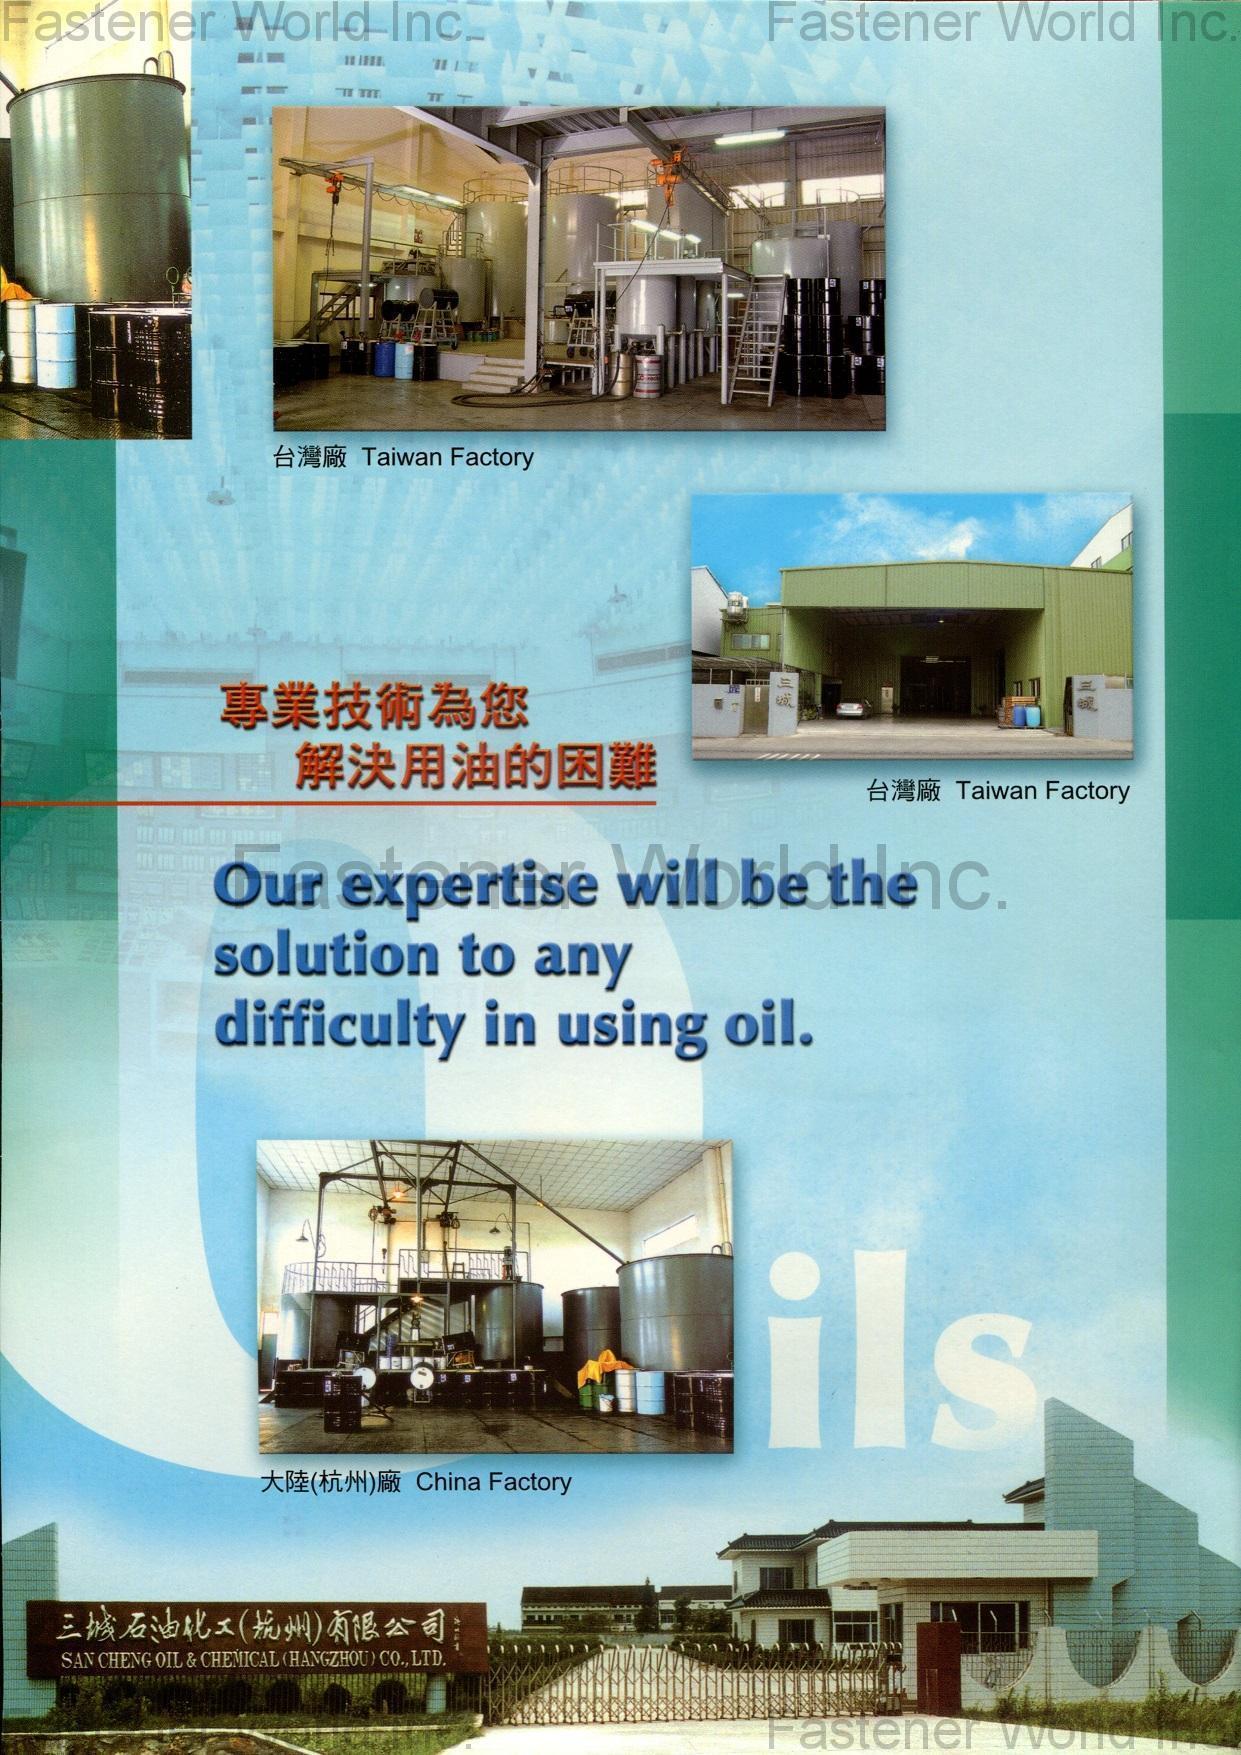 SAN TZENG ENTERPRISE CO., LTD.  , Forming & Tapping Oils of Bolts & Nuts, METALWORKING OIL, LUBRICATING OIL, WATER SOLUBILE OIL, HYDRAULIC OIL, CIRCULATING OIL , Forming Oil